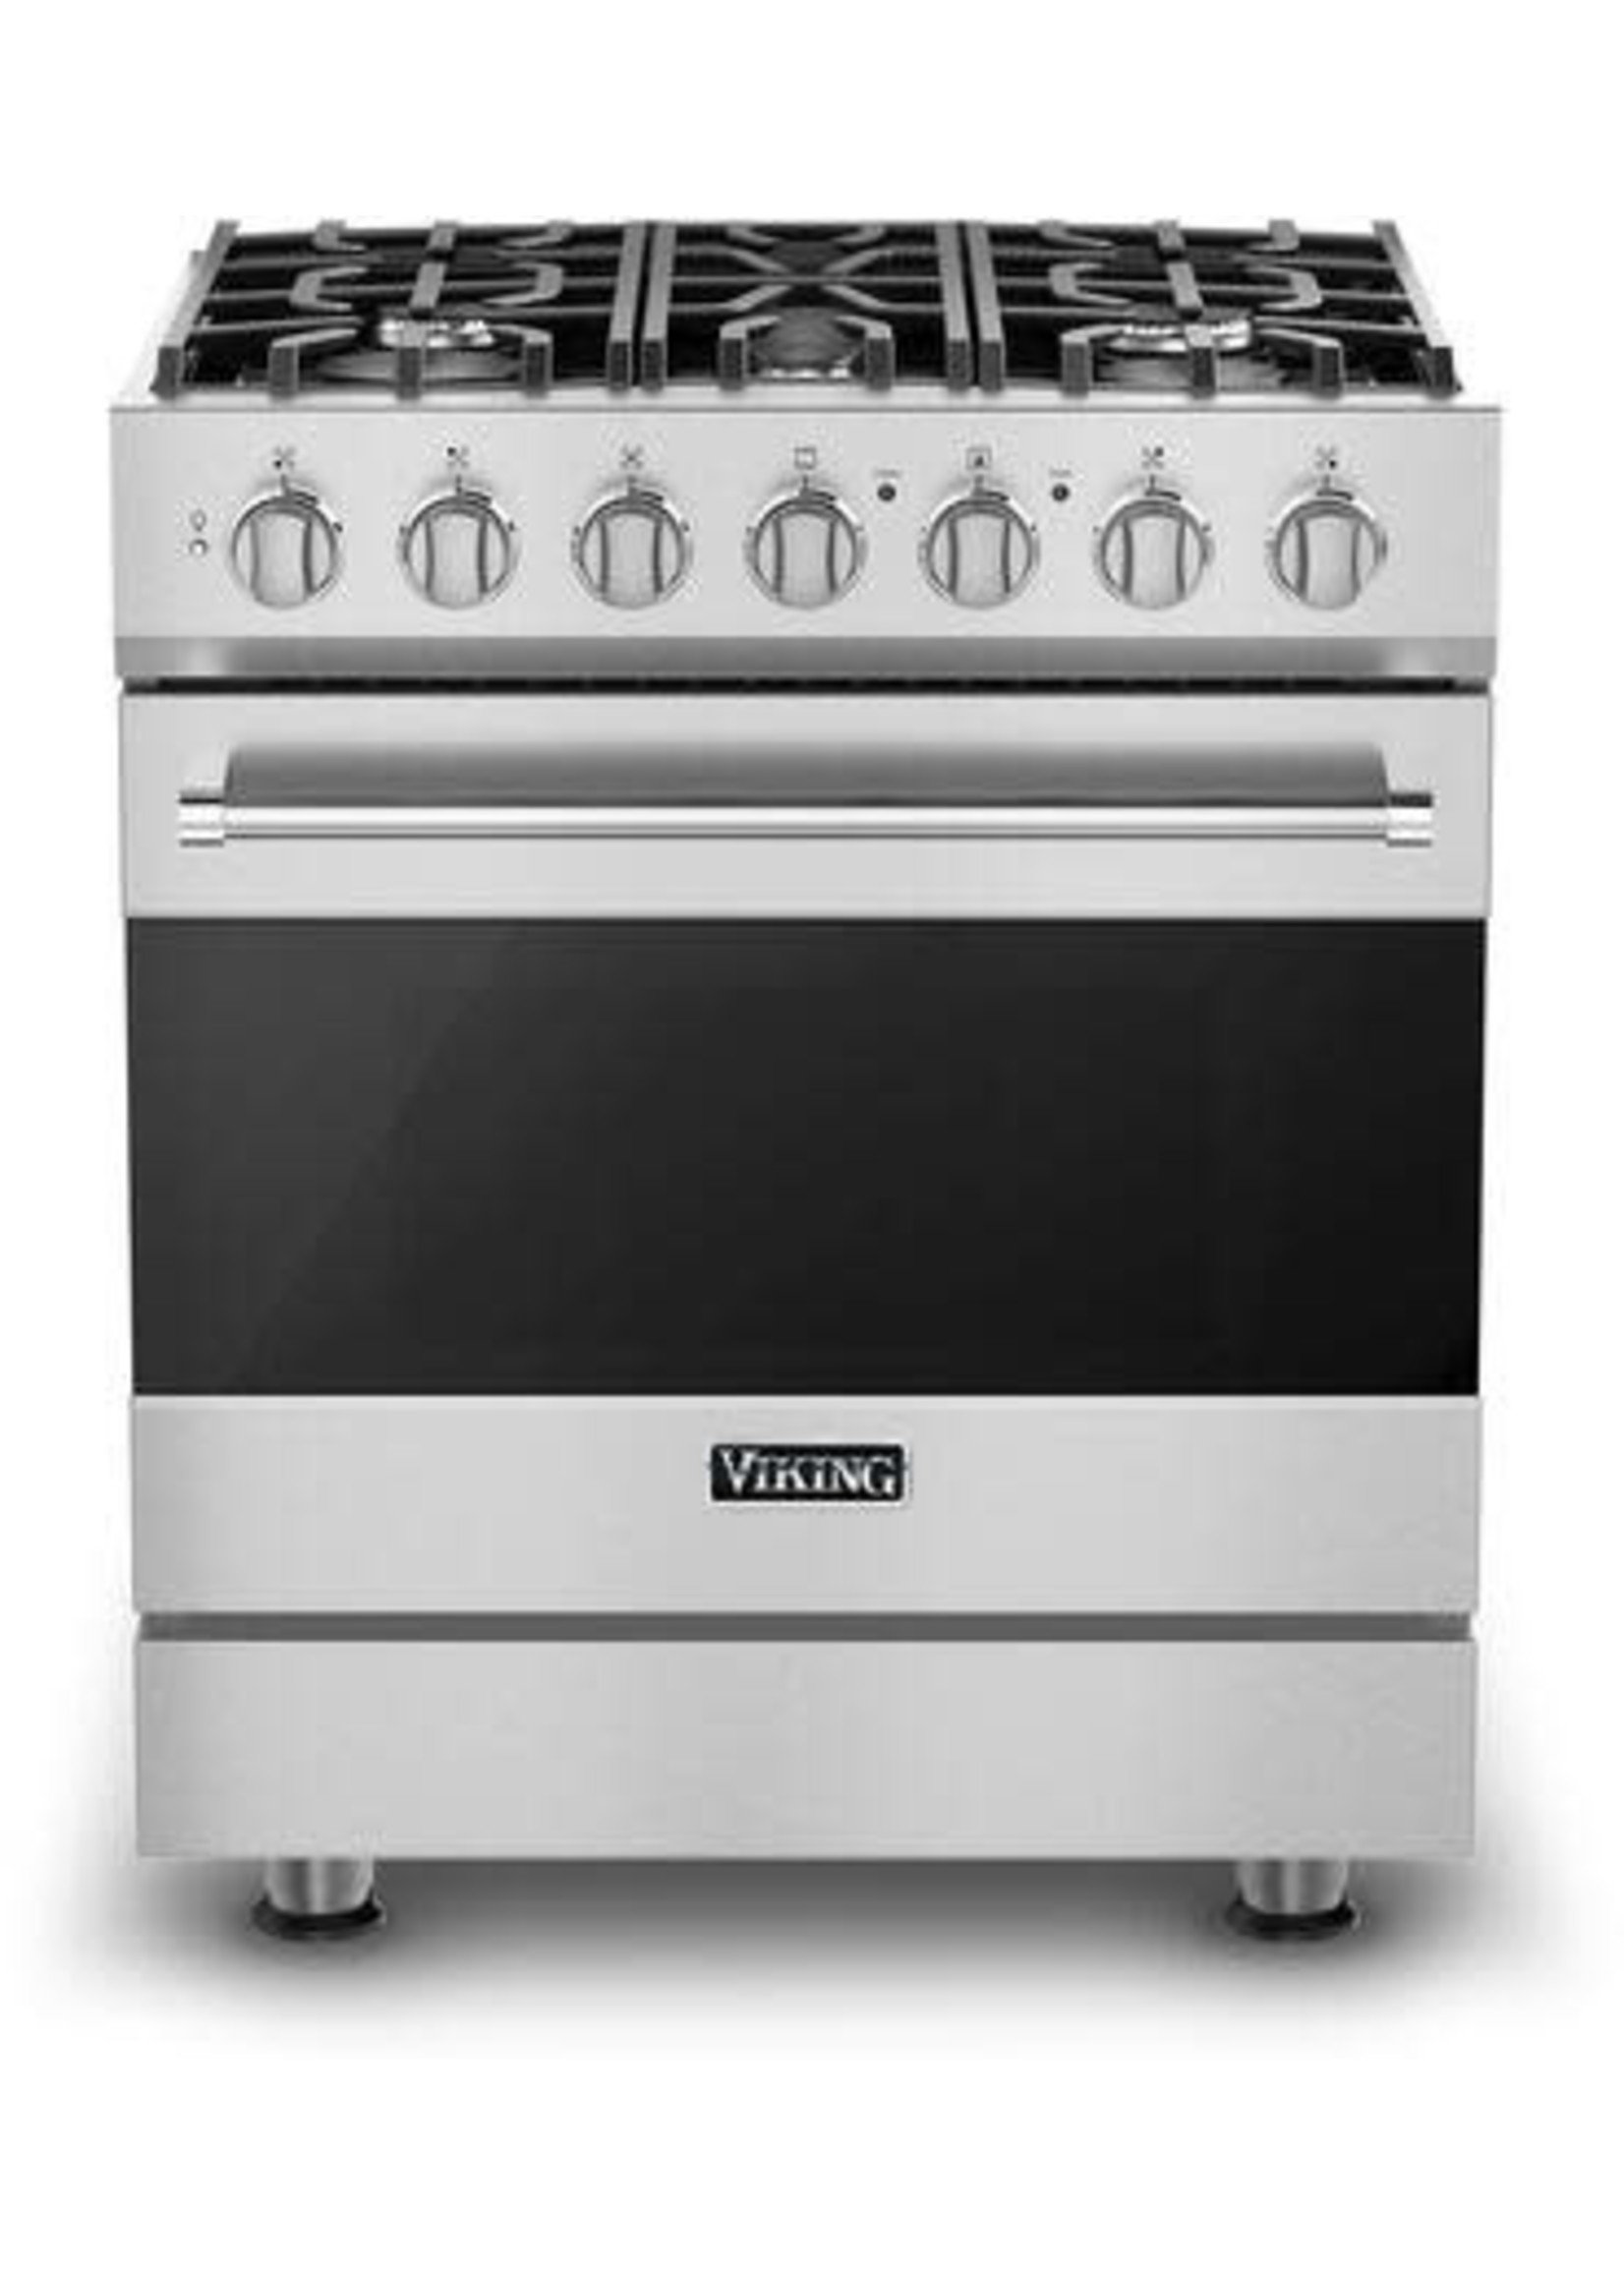 VIKING Viking 3 Series 30 Inch Freestanding All Gas Range with Natural Gas, 5 Sealed Burners